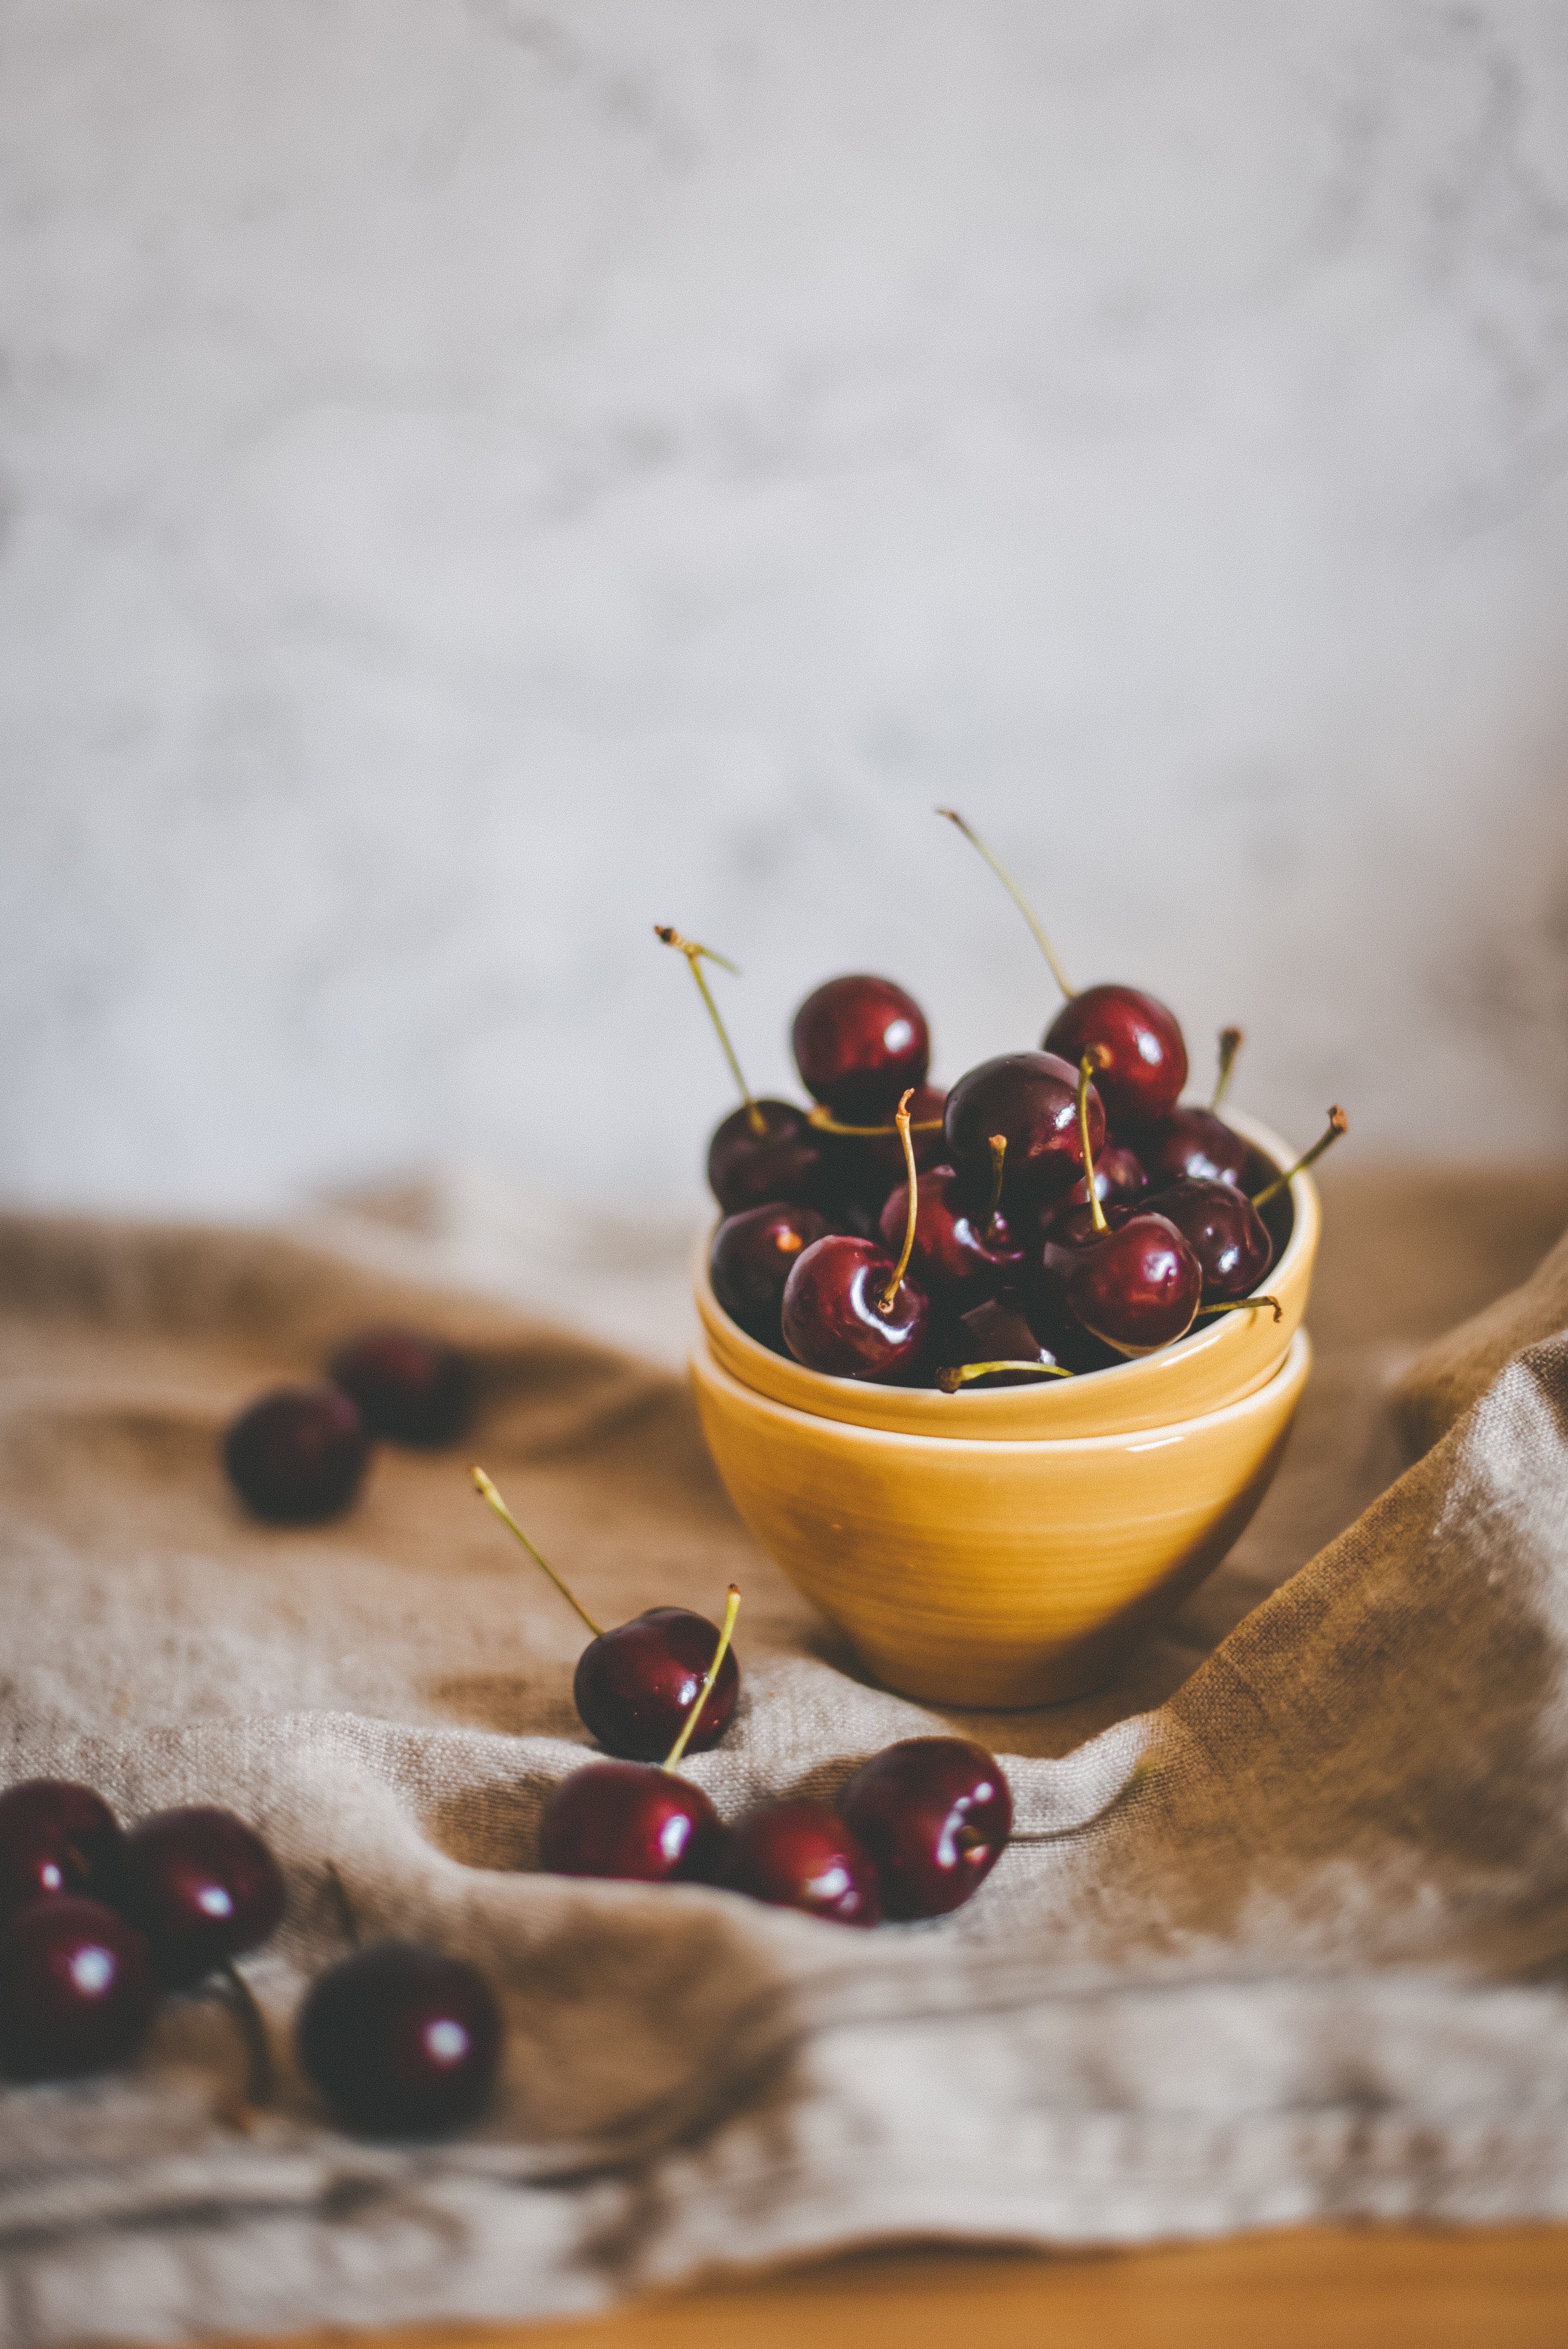 108942 Screensavers and Wallpapers Berry for phone. Download sweet cherry, food, cherry, berry, ripe, dish pictures for free